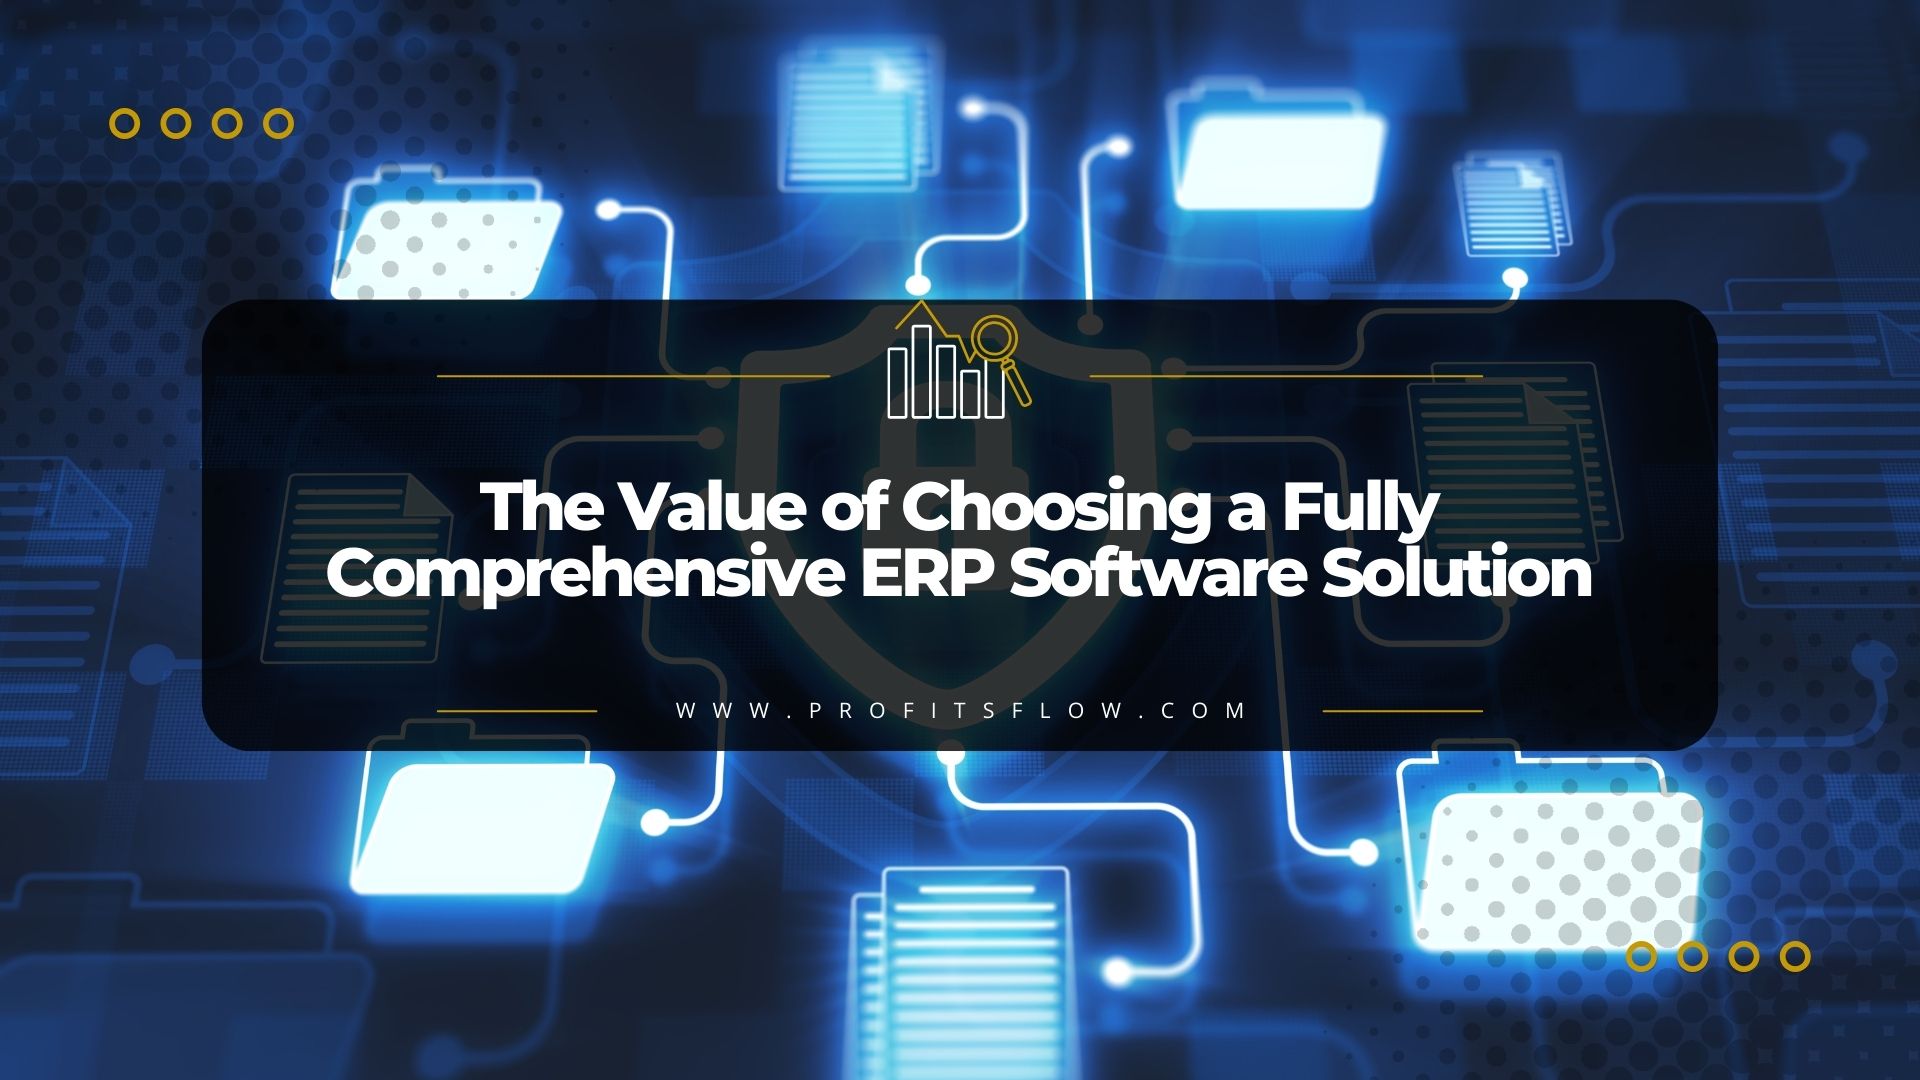 The Value of Choosing a Fully Comprehensive ERP Software Solution